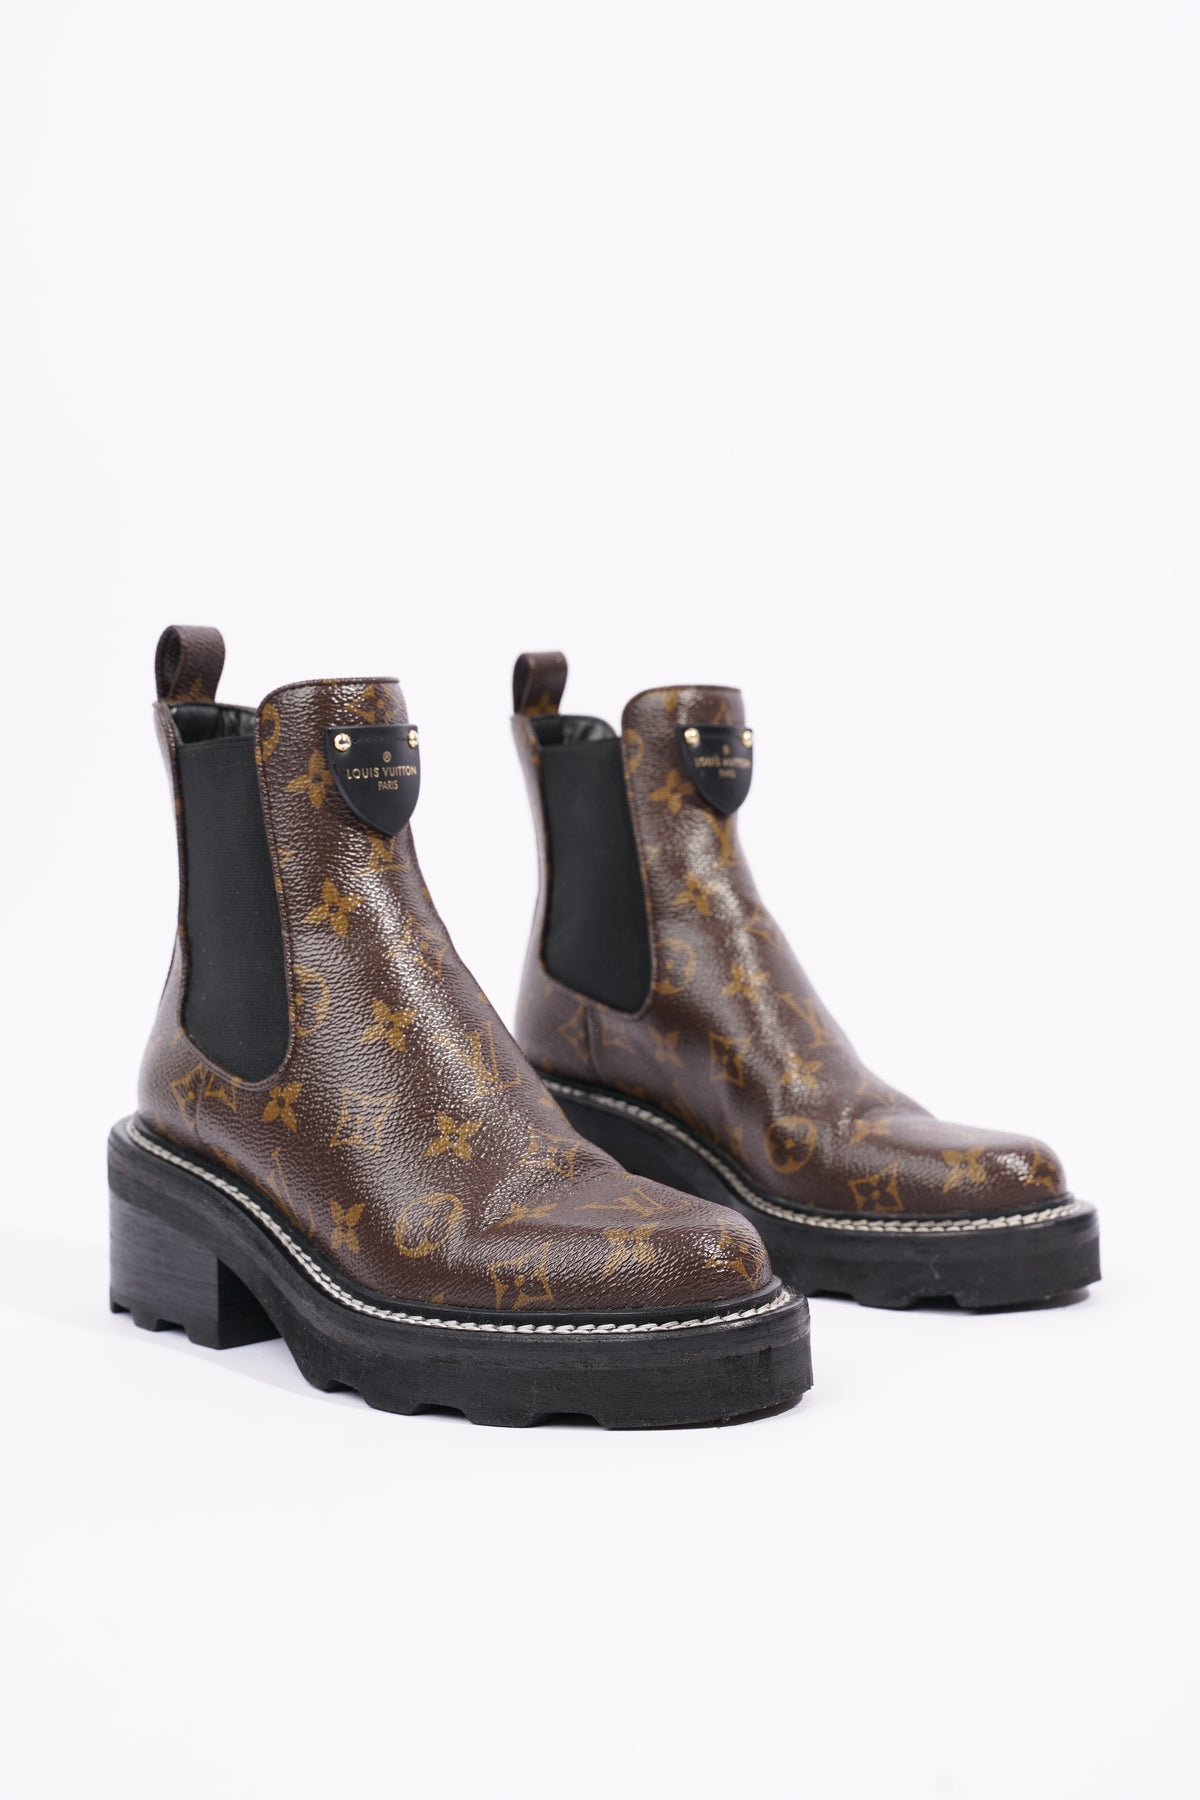 Louis Vuitton LV Beaubourg Ankle Boot